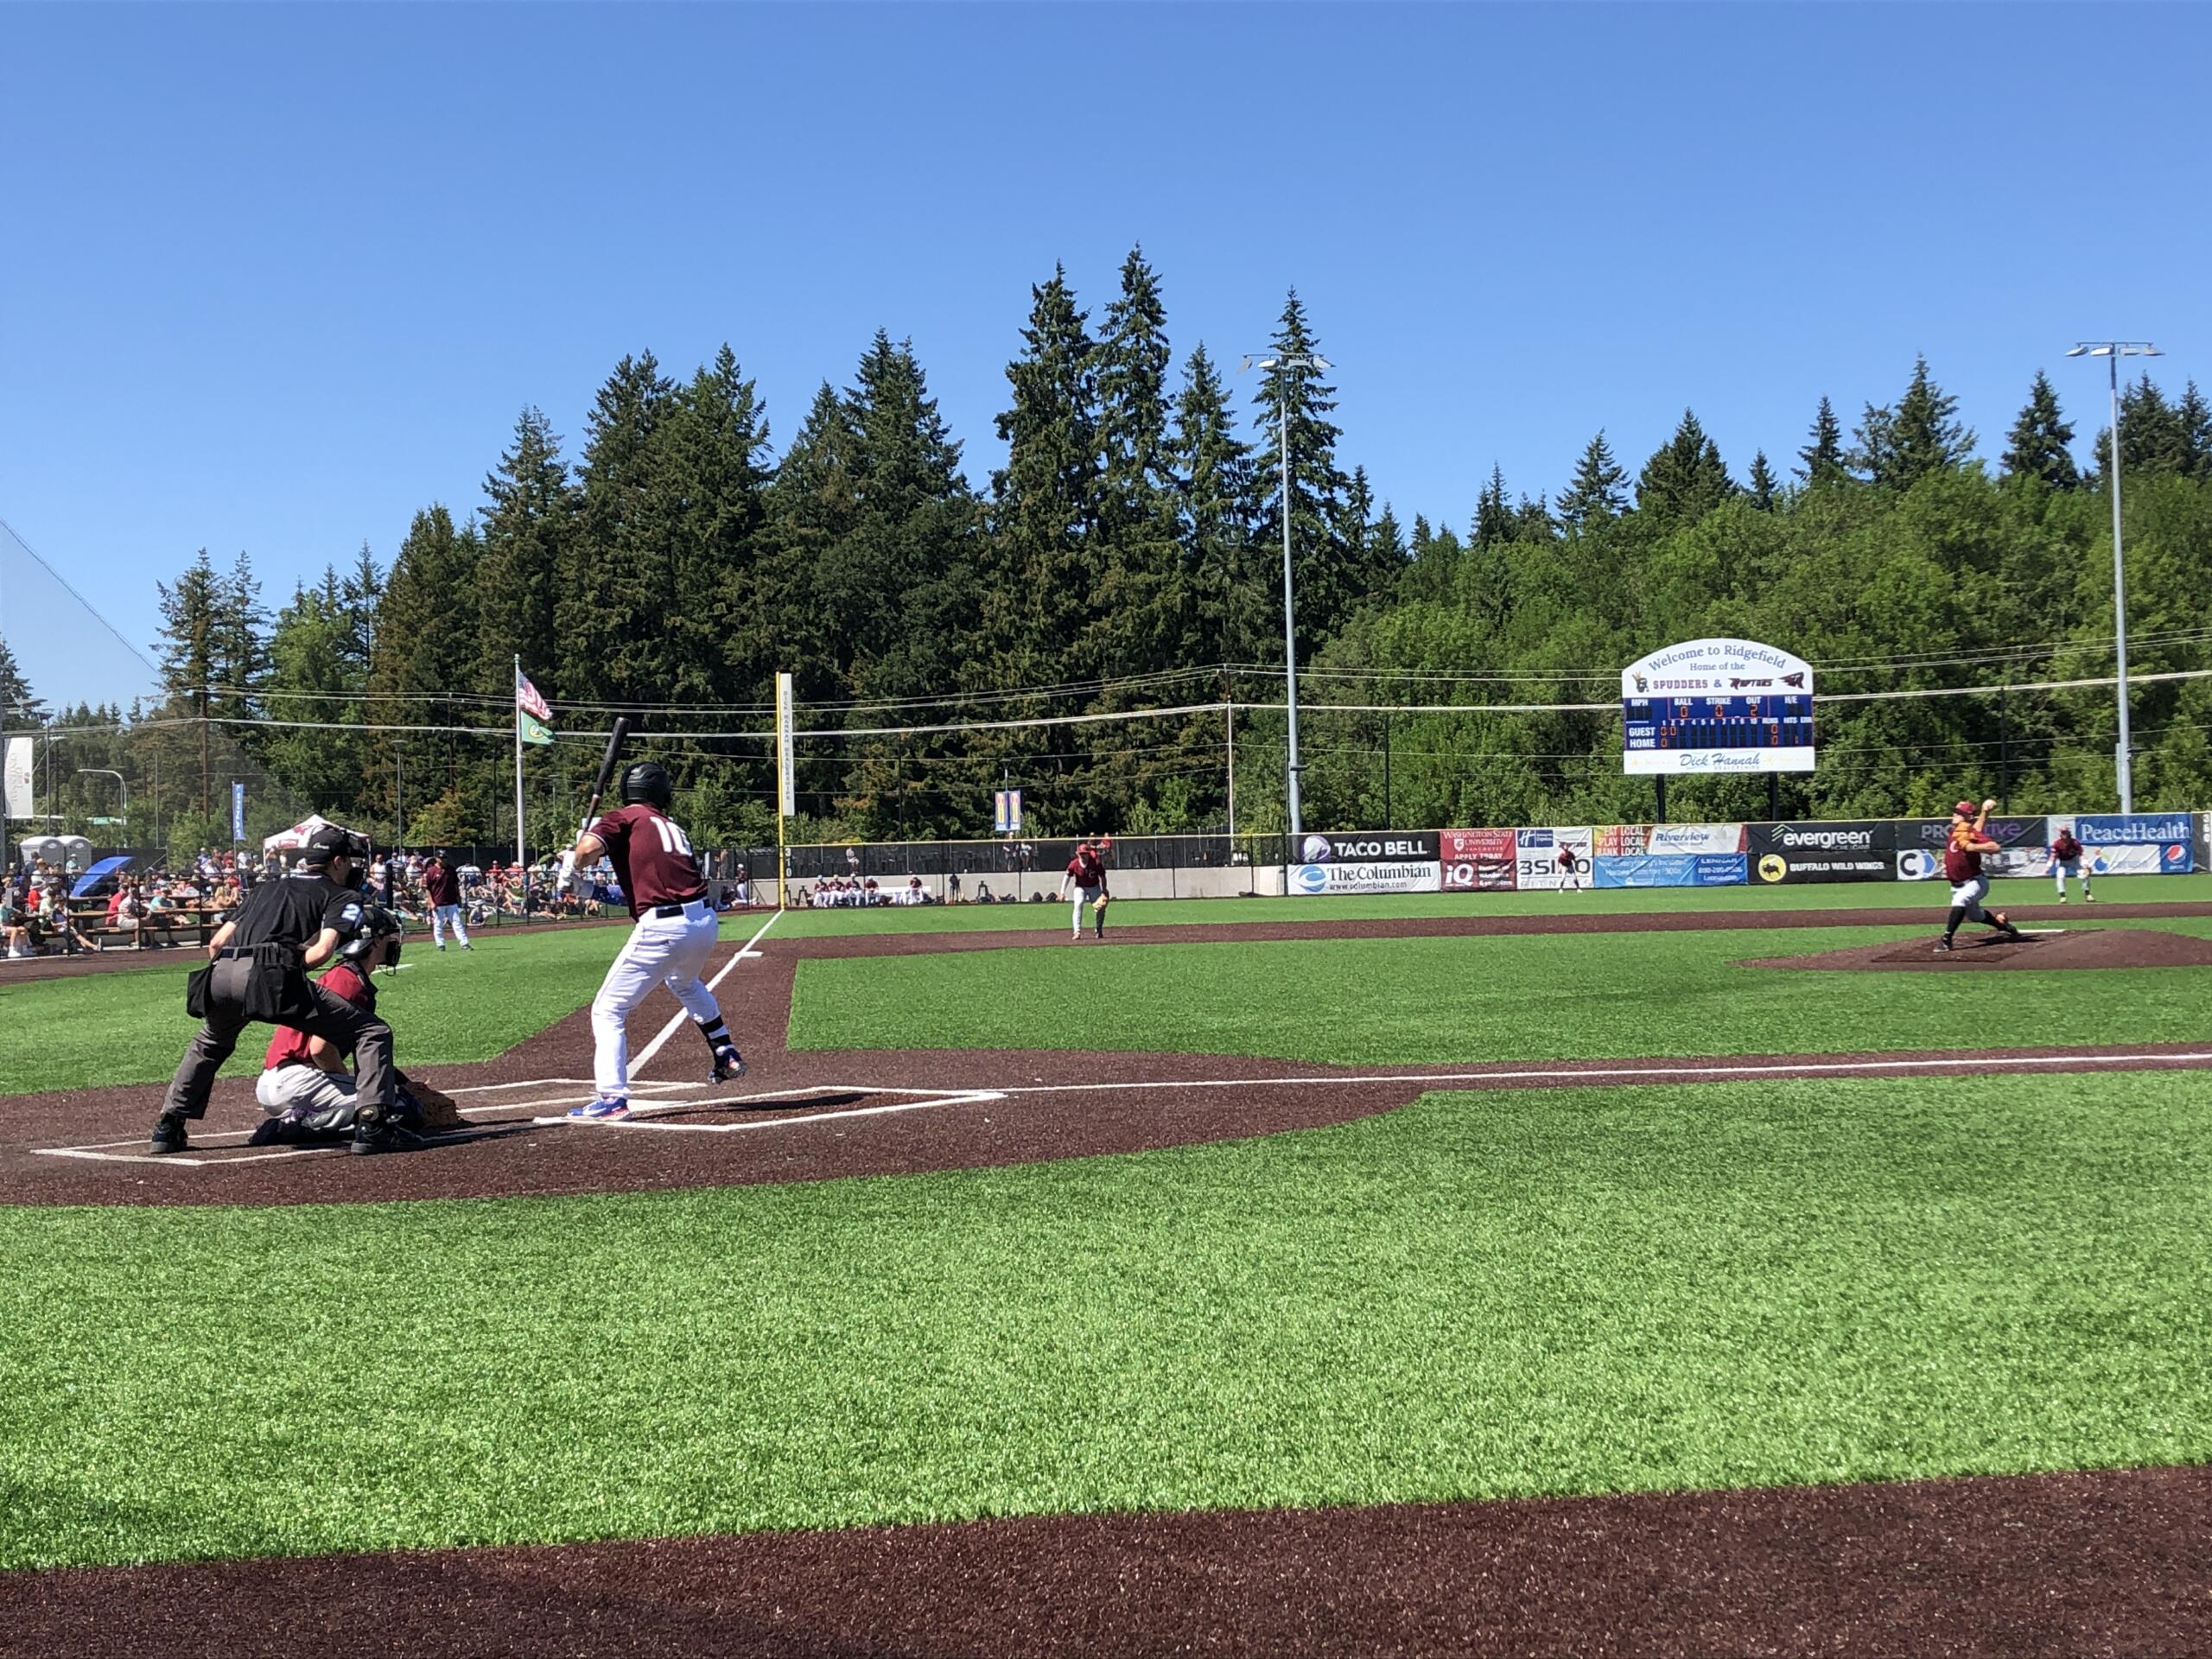 Ridgefield Raptors first baseman Dominic Enbody awaits a pitch from Corvallis right-hander Brock Townsend on Sunday at Ridgefield Outdoor Recreation Complex.